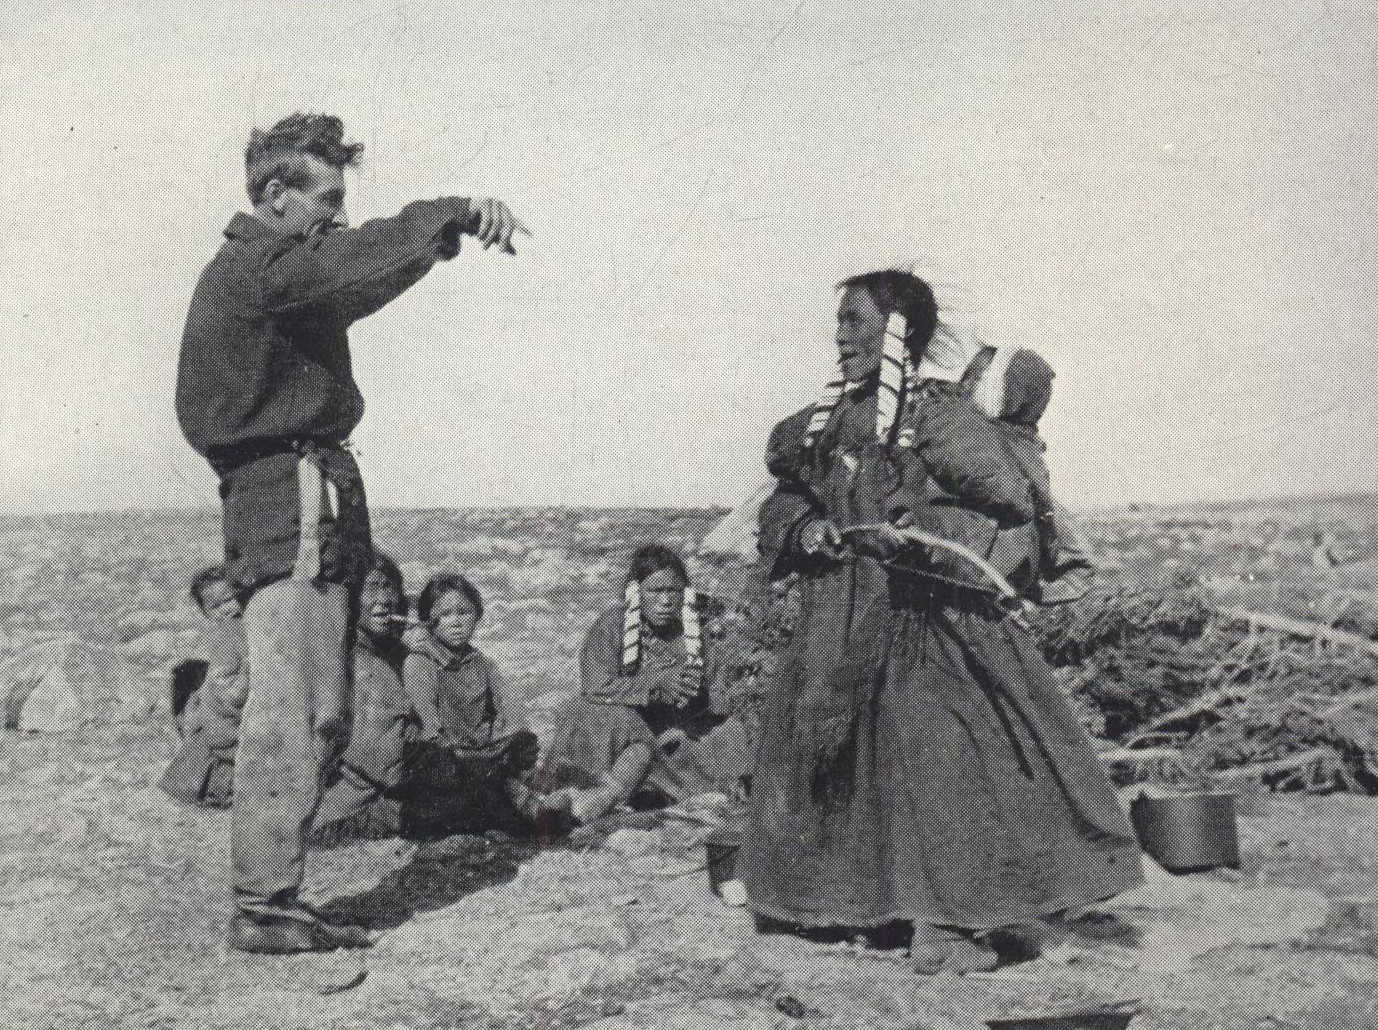 Man talking with group of Inuit